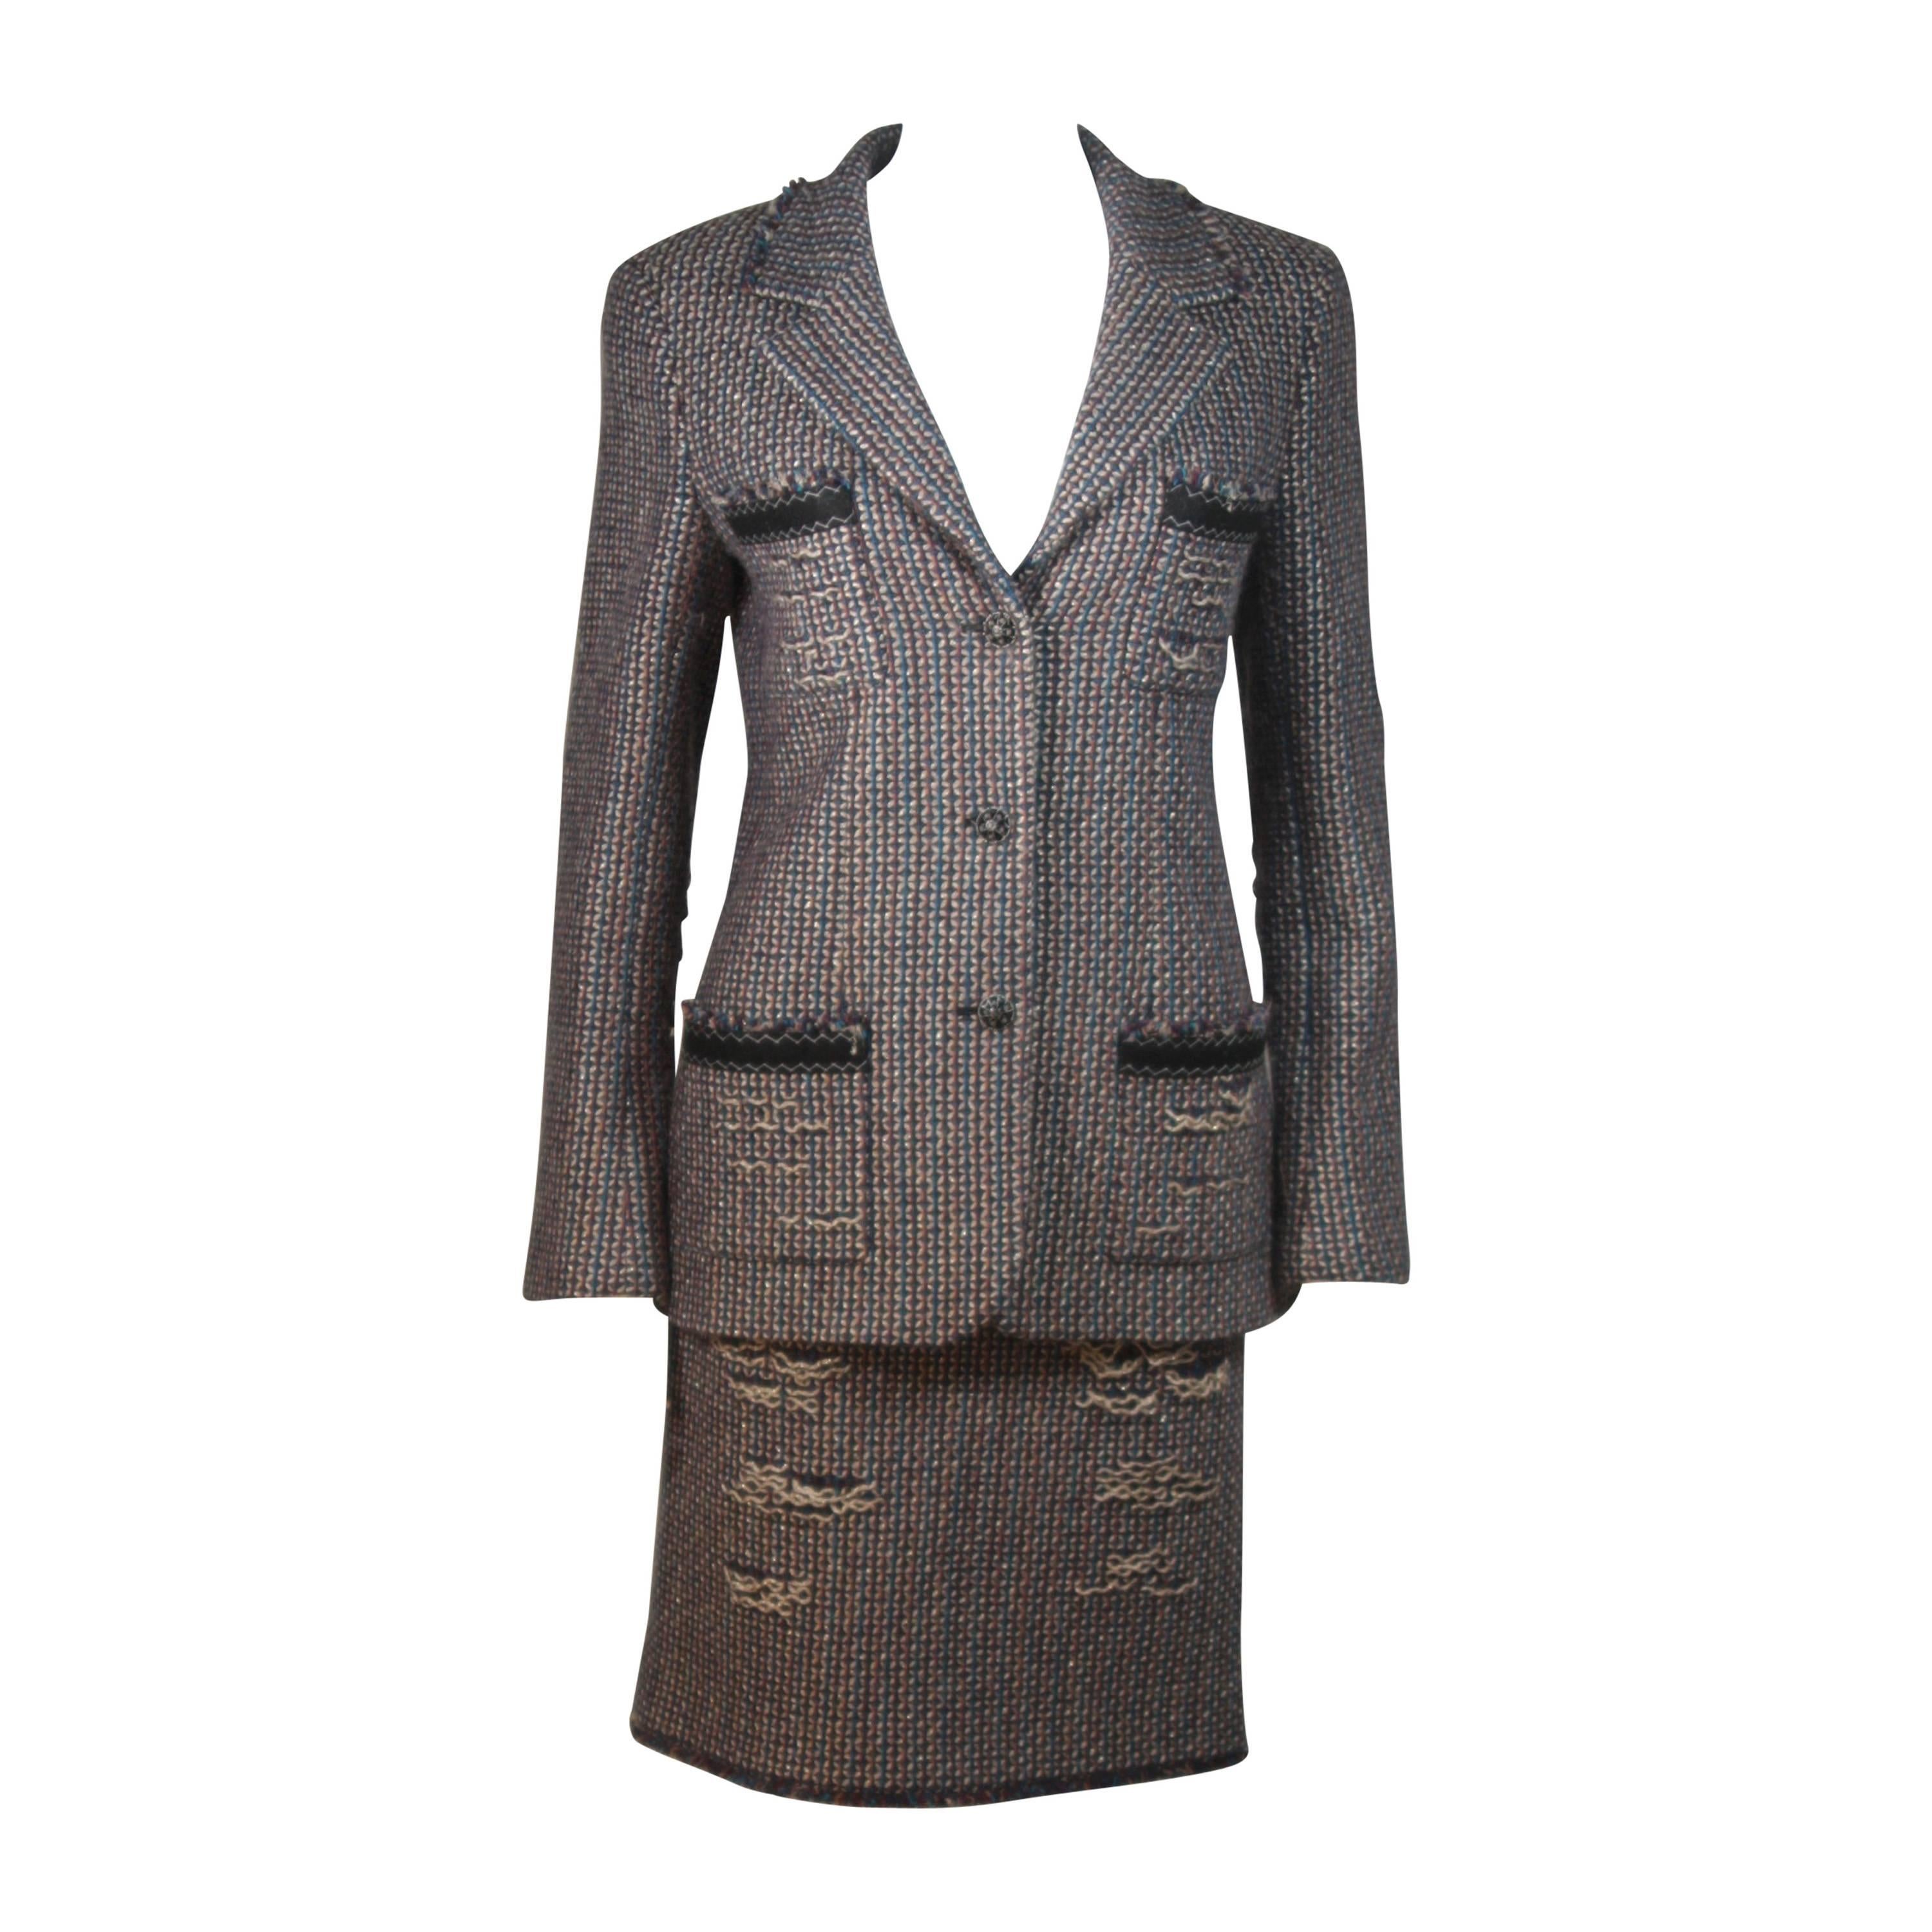 CHANEL Gold Metallic Tweed with Brown and Burgundy Skirt Suit Size 40